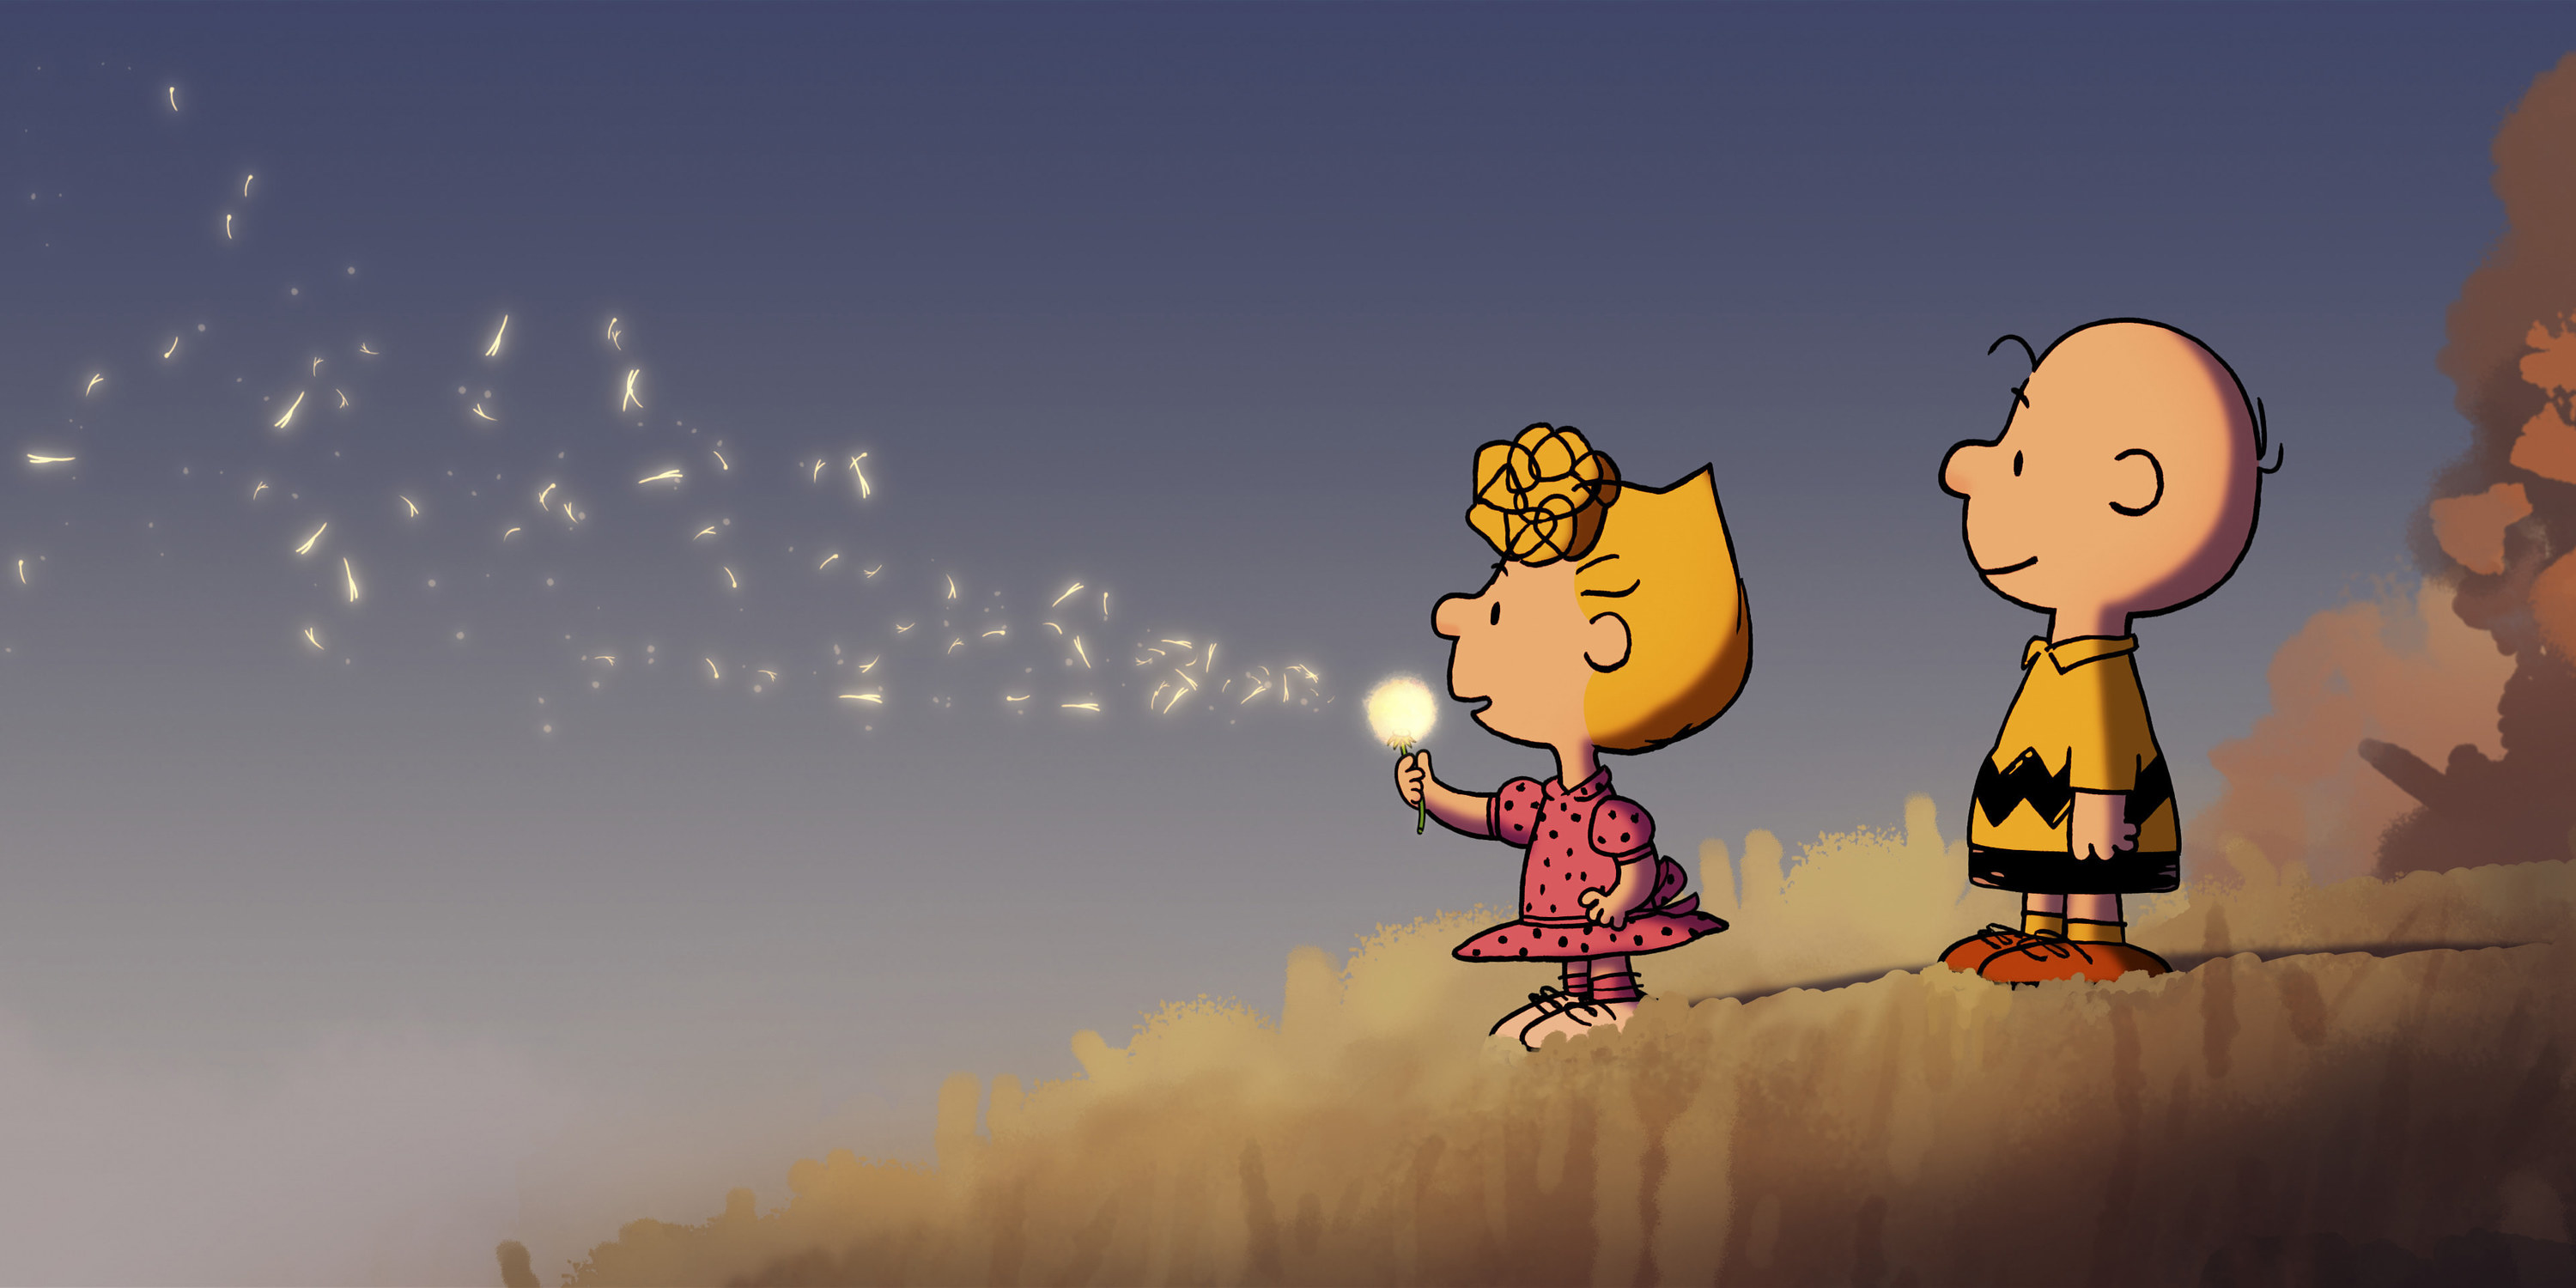 Charlie Brown stands with Sally on a hill